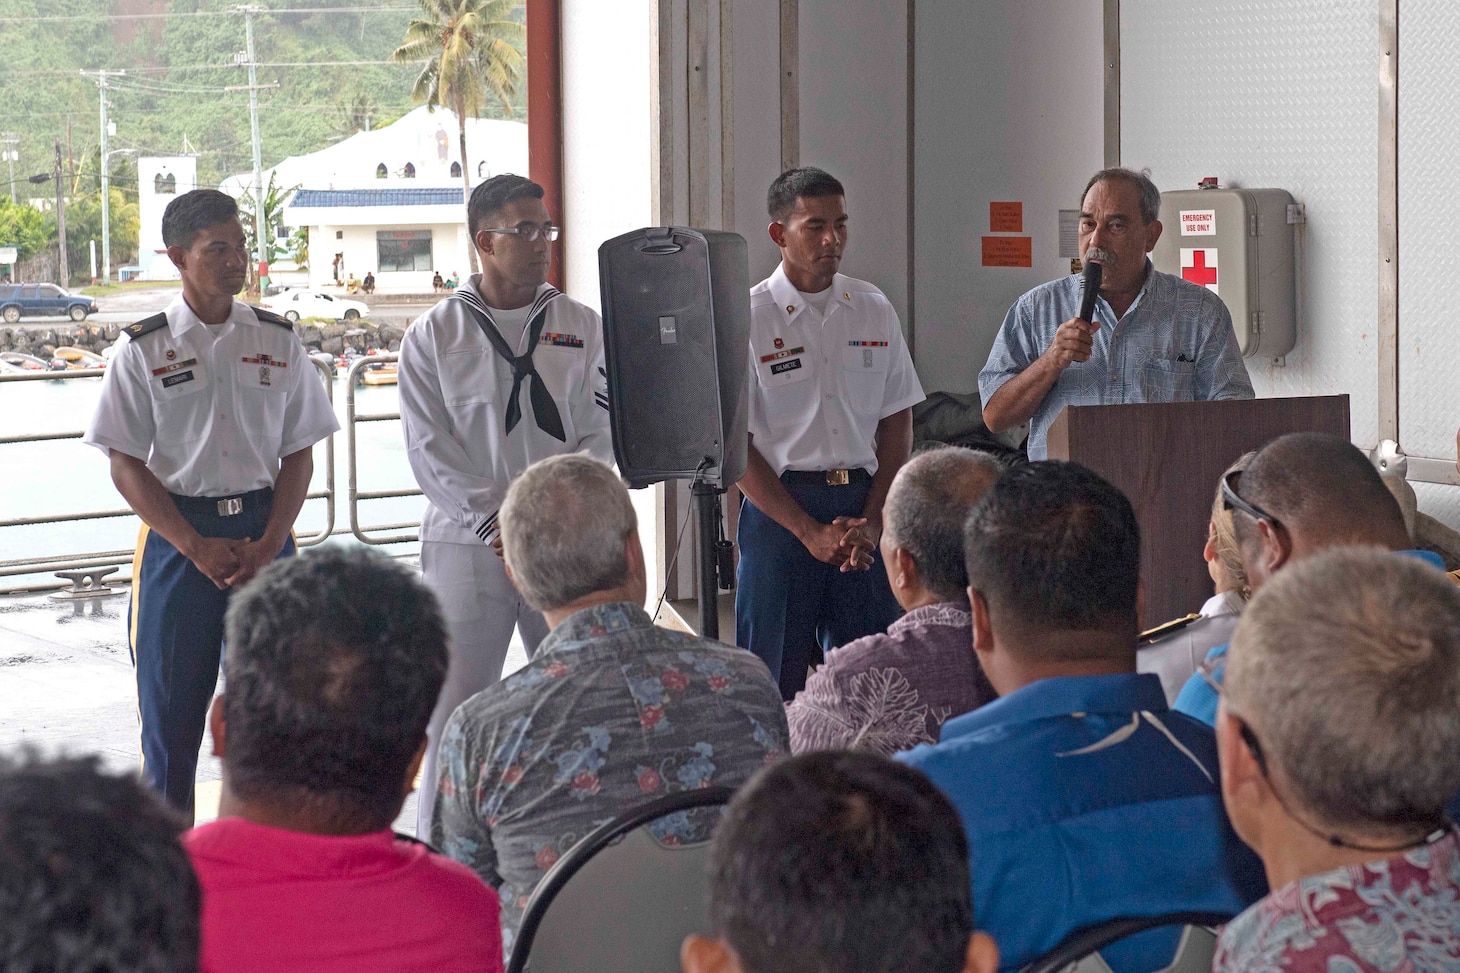 CHUUK, Federated States of Micronesia (April 25, 2019) His Excellency President Peter Christian, president of the Federated States of Micronesia, recognizes U.S. Army Spc. Rally Gilmete from Pohnpei, Micronesia, U.S. Navy Information Systems Technician 2nd Class KN Nethon from Uman, Micronesia, and U.S. Army Sgt. Joseia Lemari, a Xavier High School graduate, during the closing ceremony aboard the Military Sealift Command expeditionary fast transport ship USNS Brunswick (T-EPF 6), strengthening strategic partnerships during Pacific Partnership 2019.